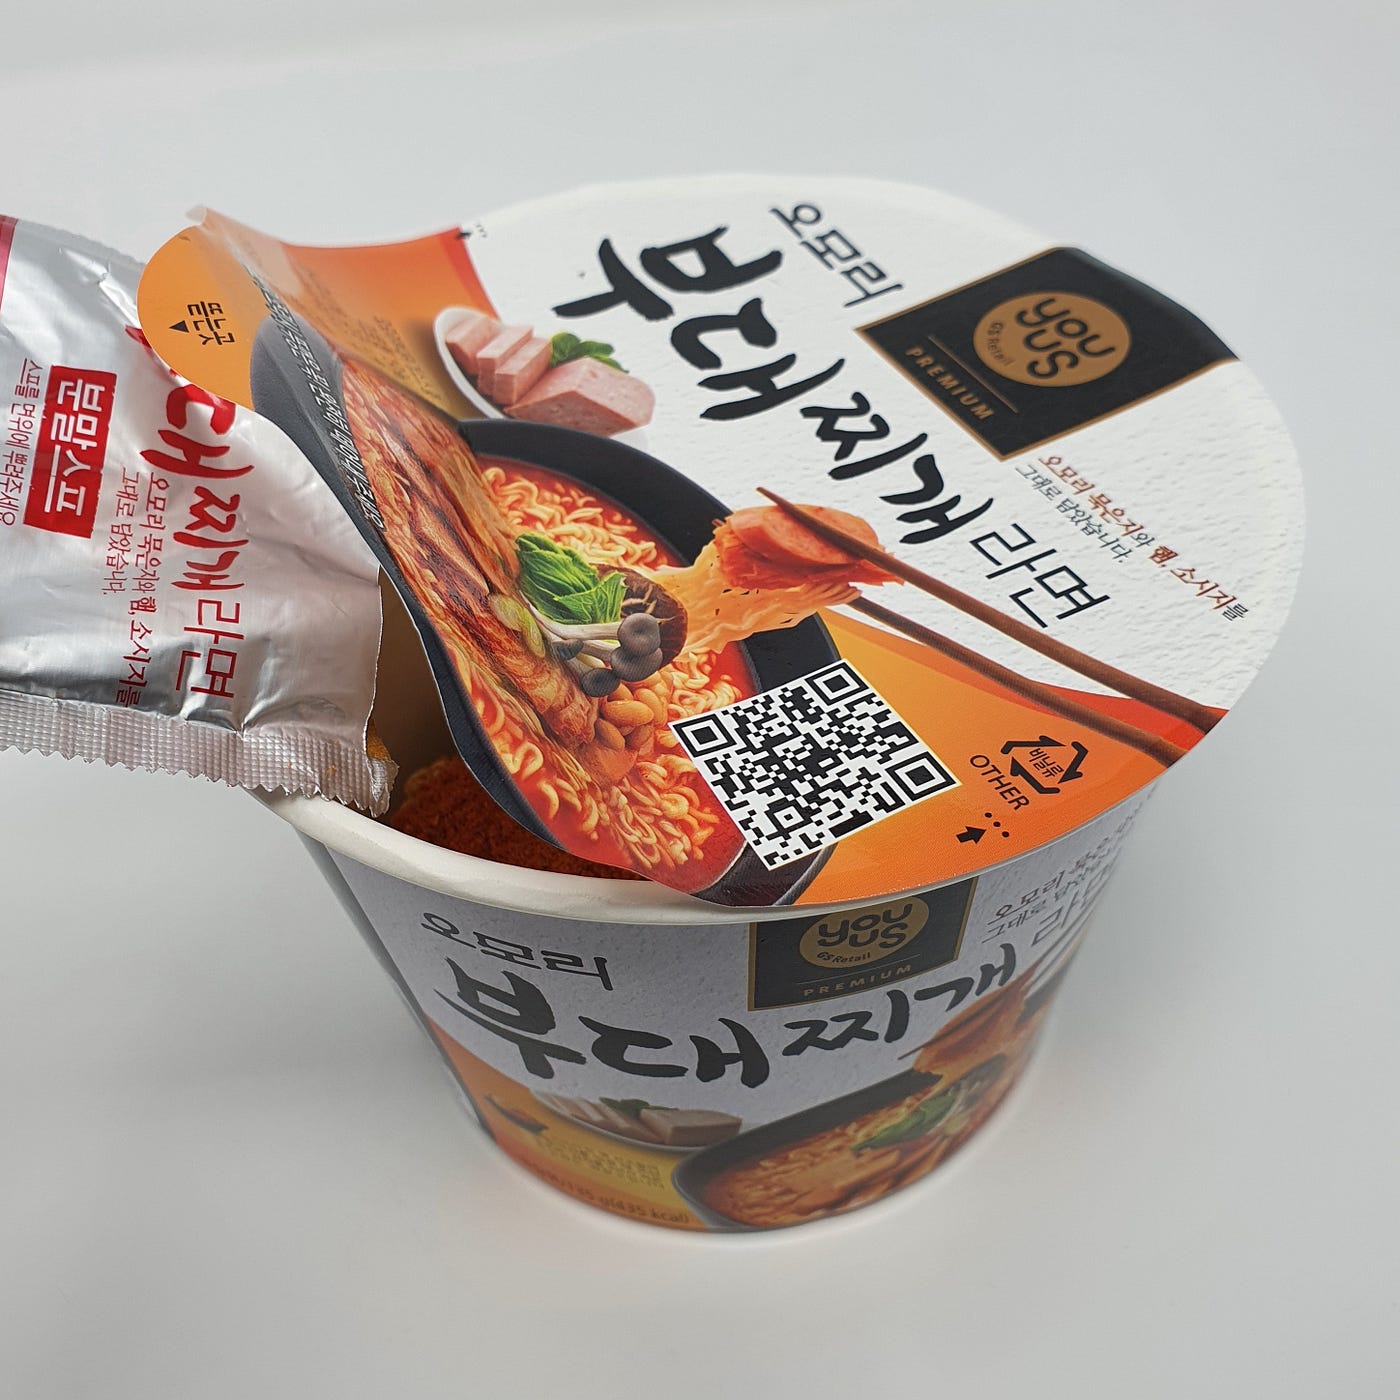 Adding the powdered soup packet to a cup of YouUs Omori Budae-jjigae Ramen.